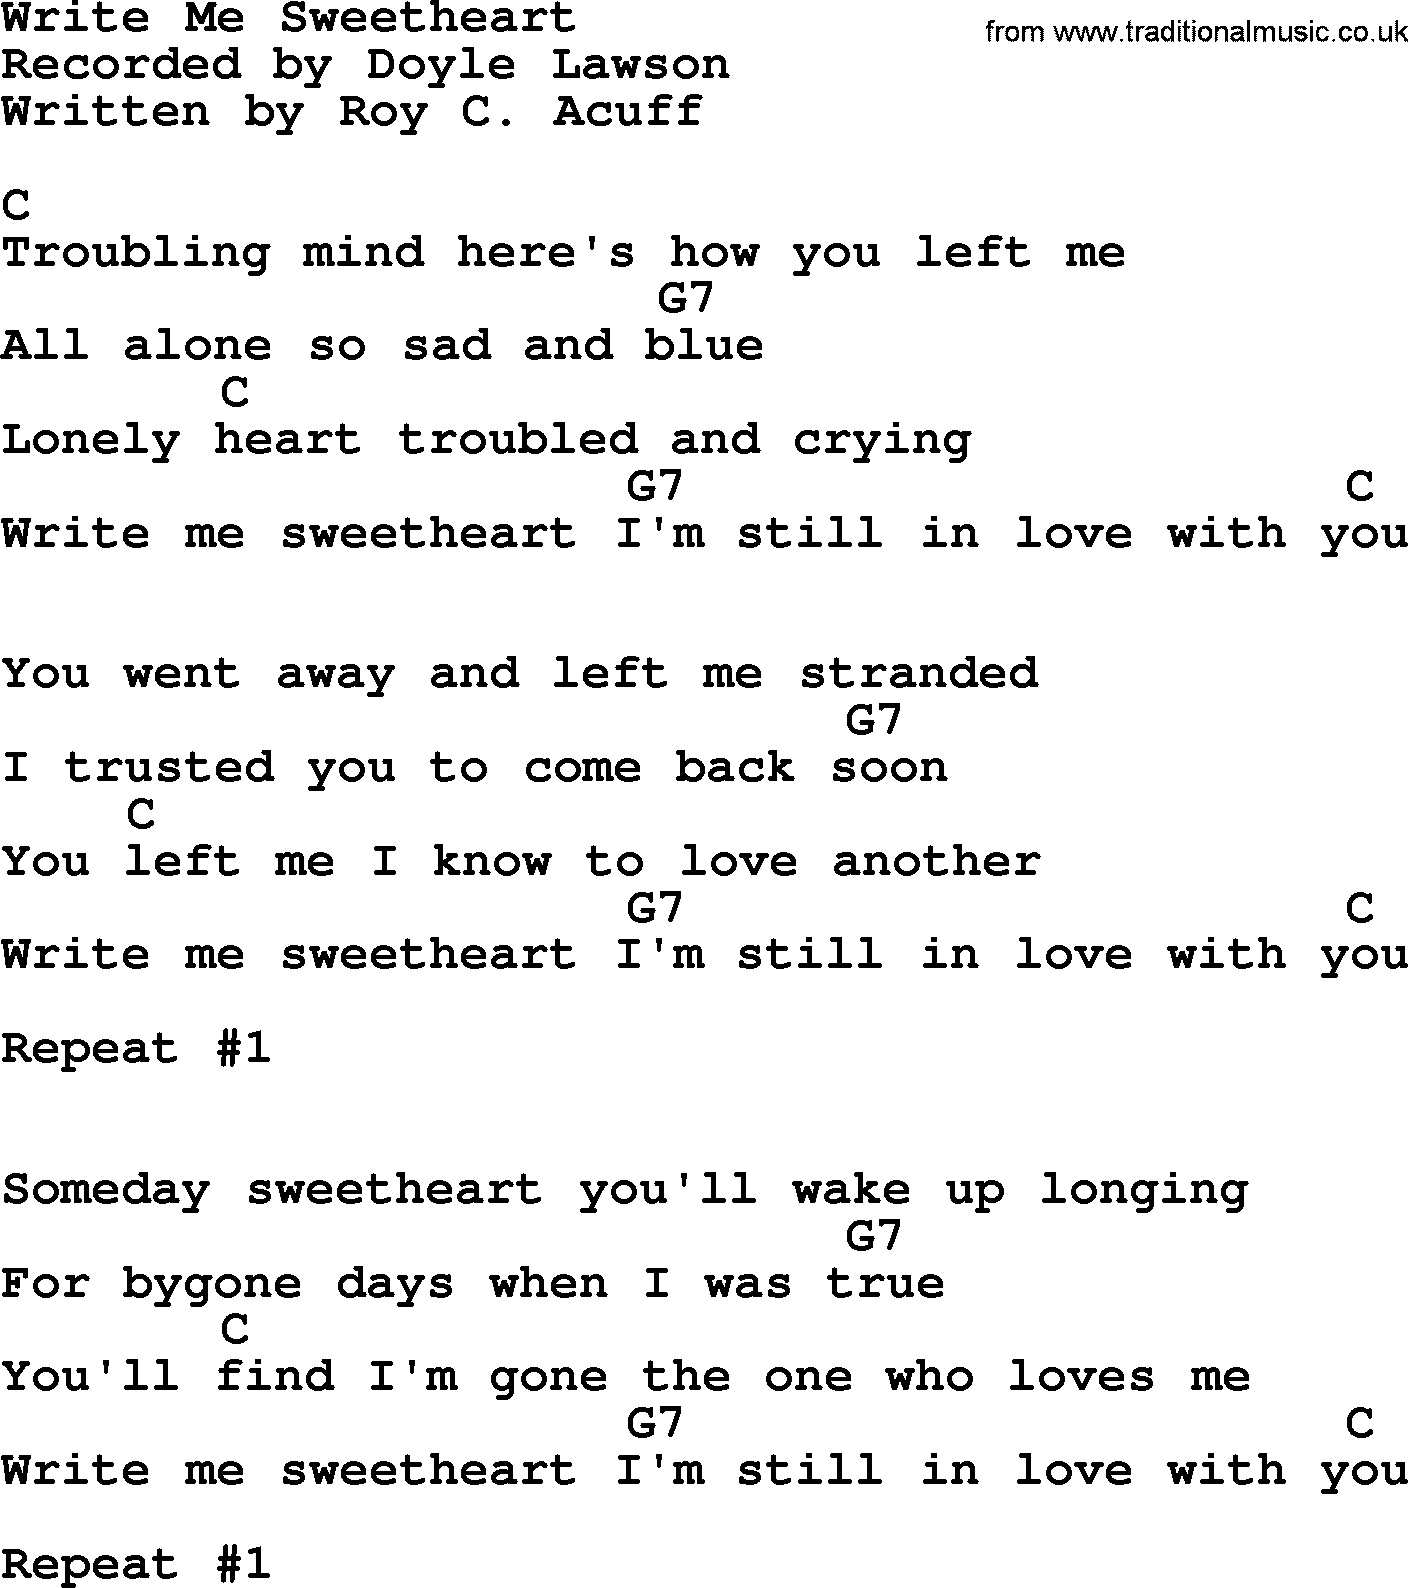 Bluegrass song: Write Me Sweetheart, lyrics and chords